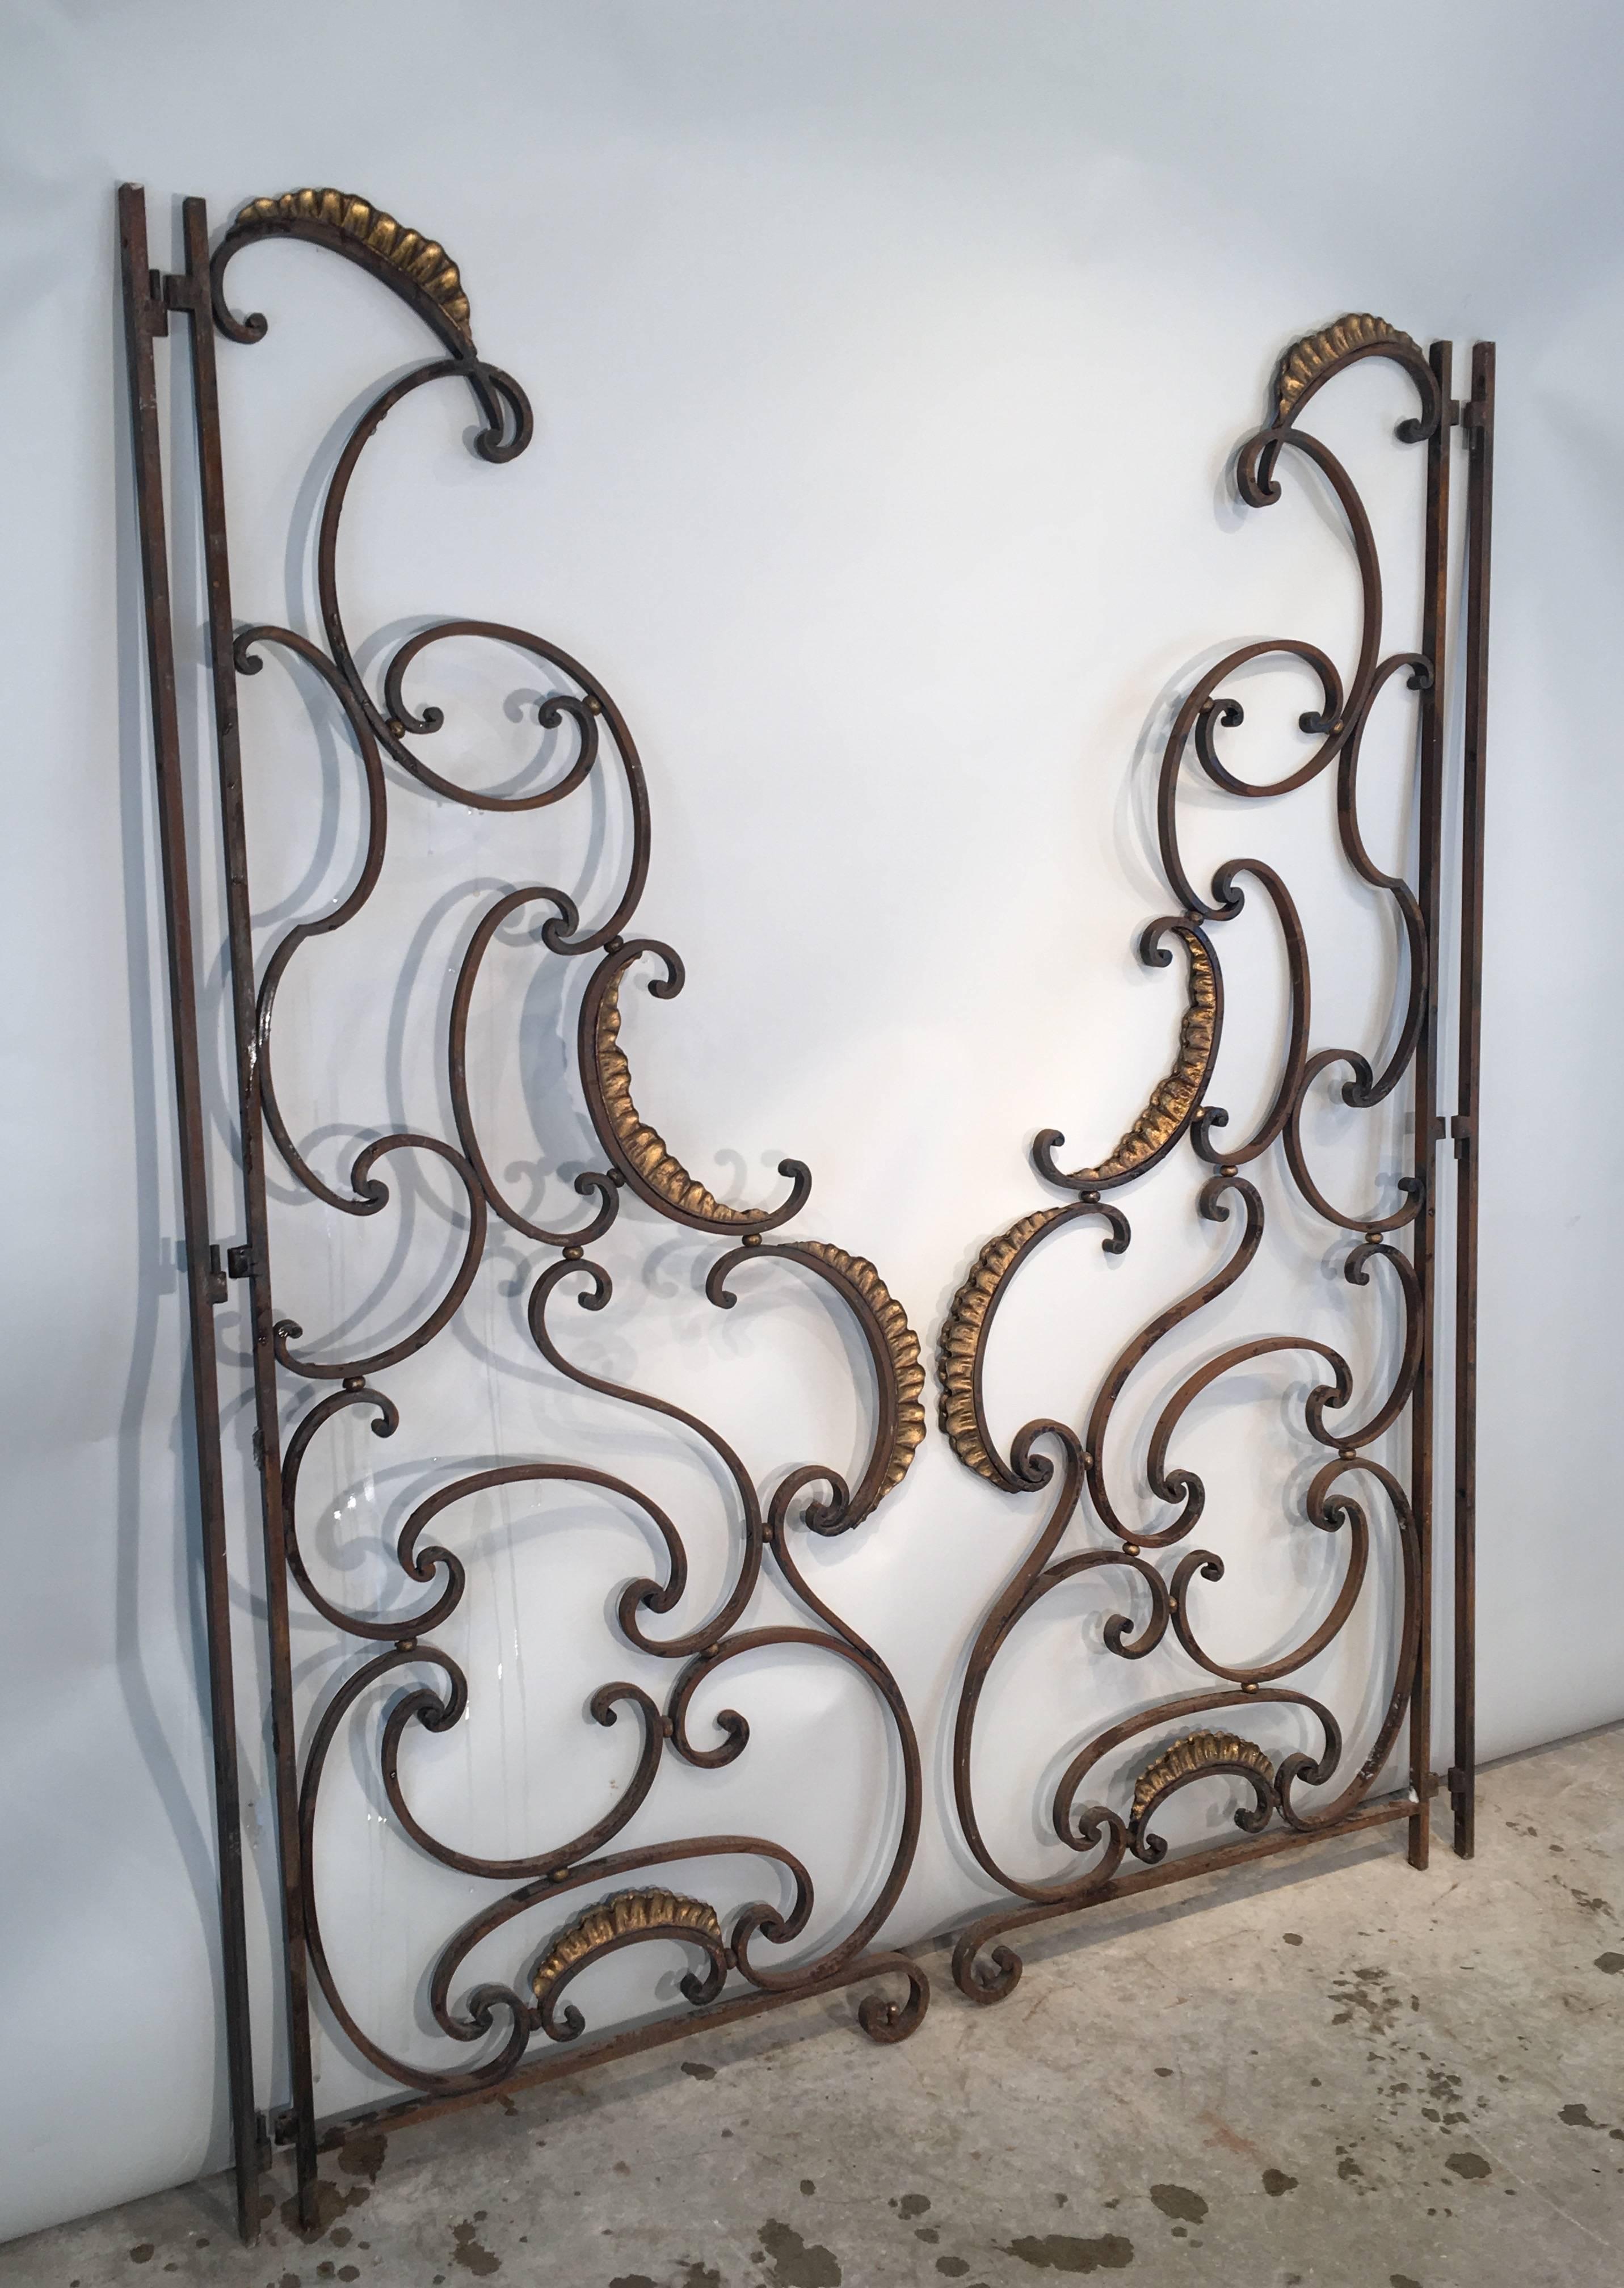 This glorious pair of wrought iron balcony dividers were originally used at both ends of a balcony to provide privacy from neighbours. This pair, however, could also be used as swinging or fixed gates, inside or out. With their intricate design and